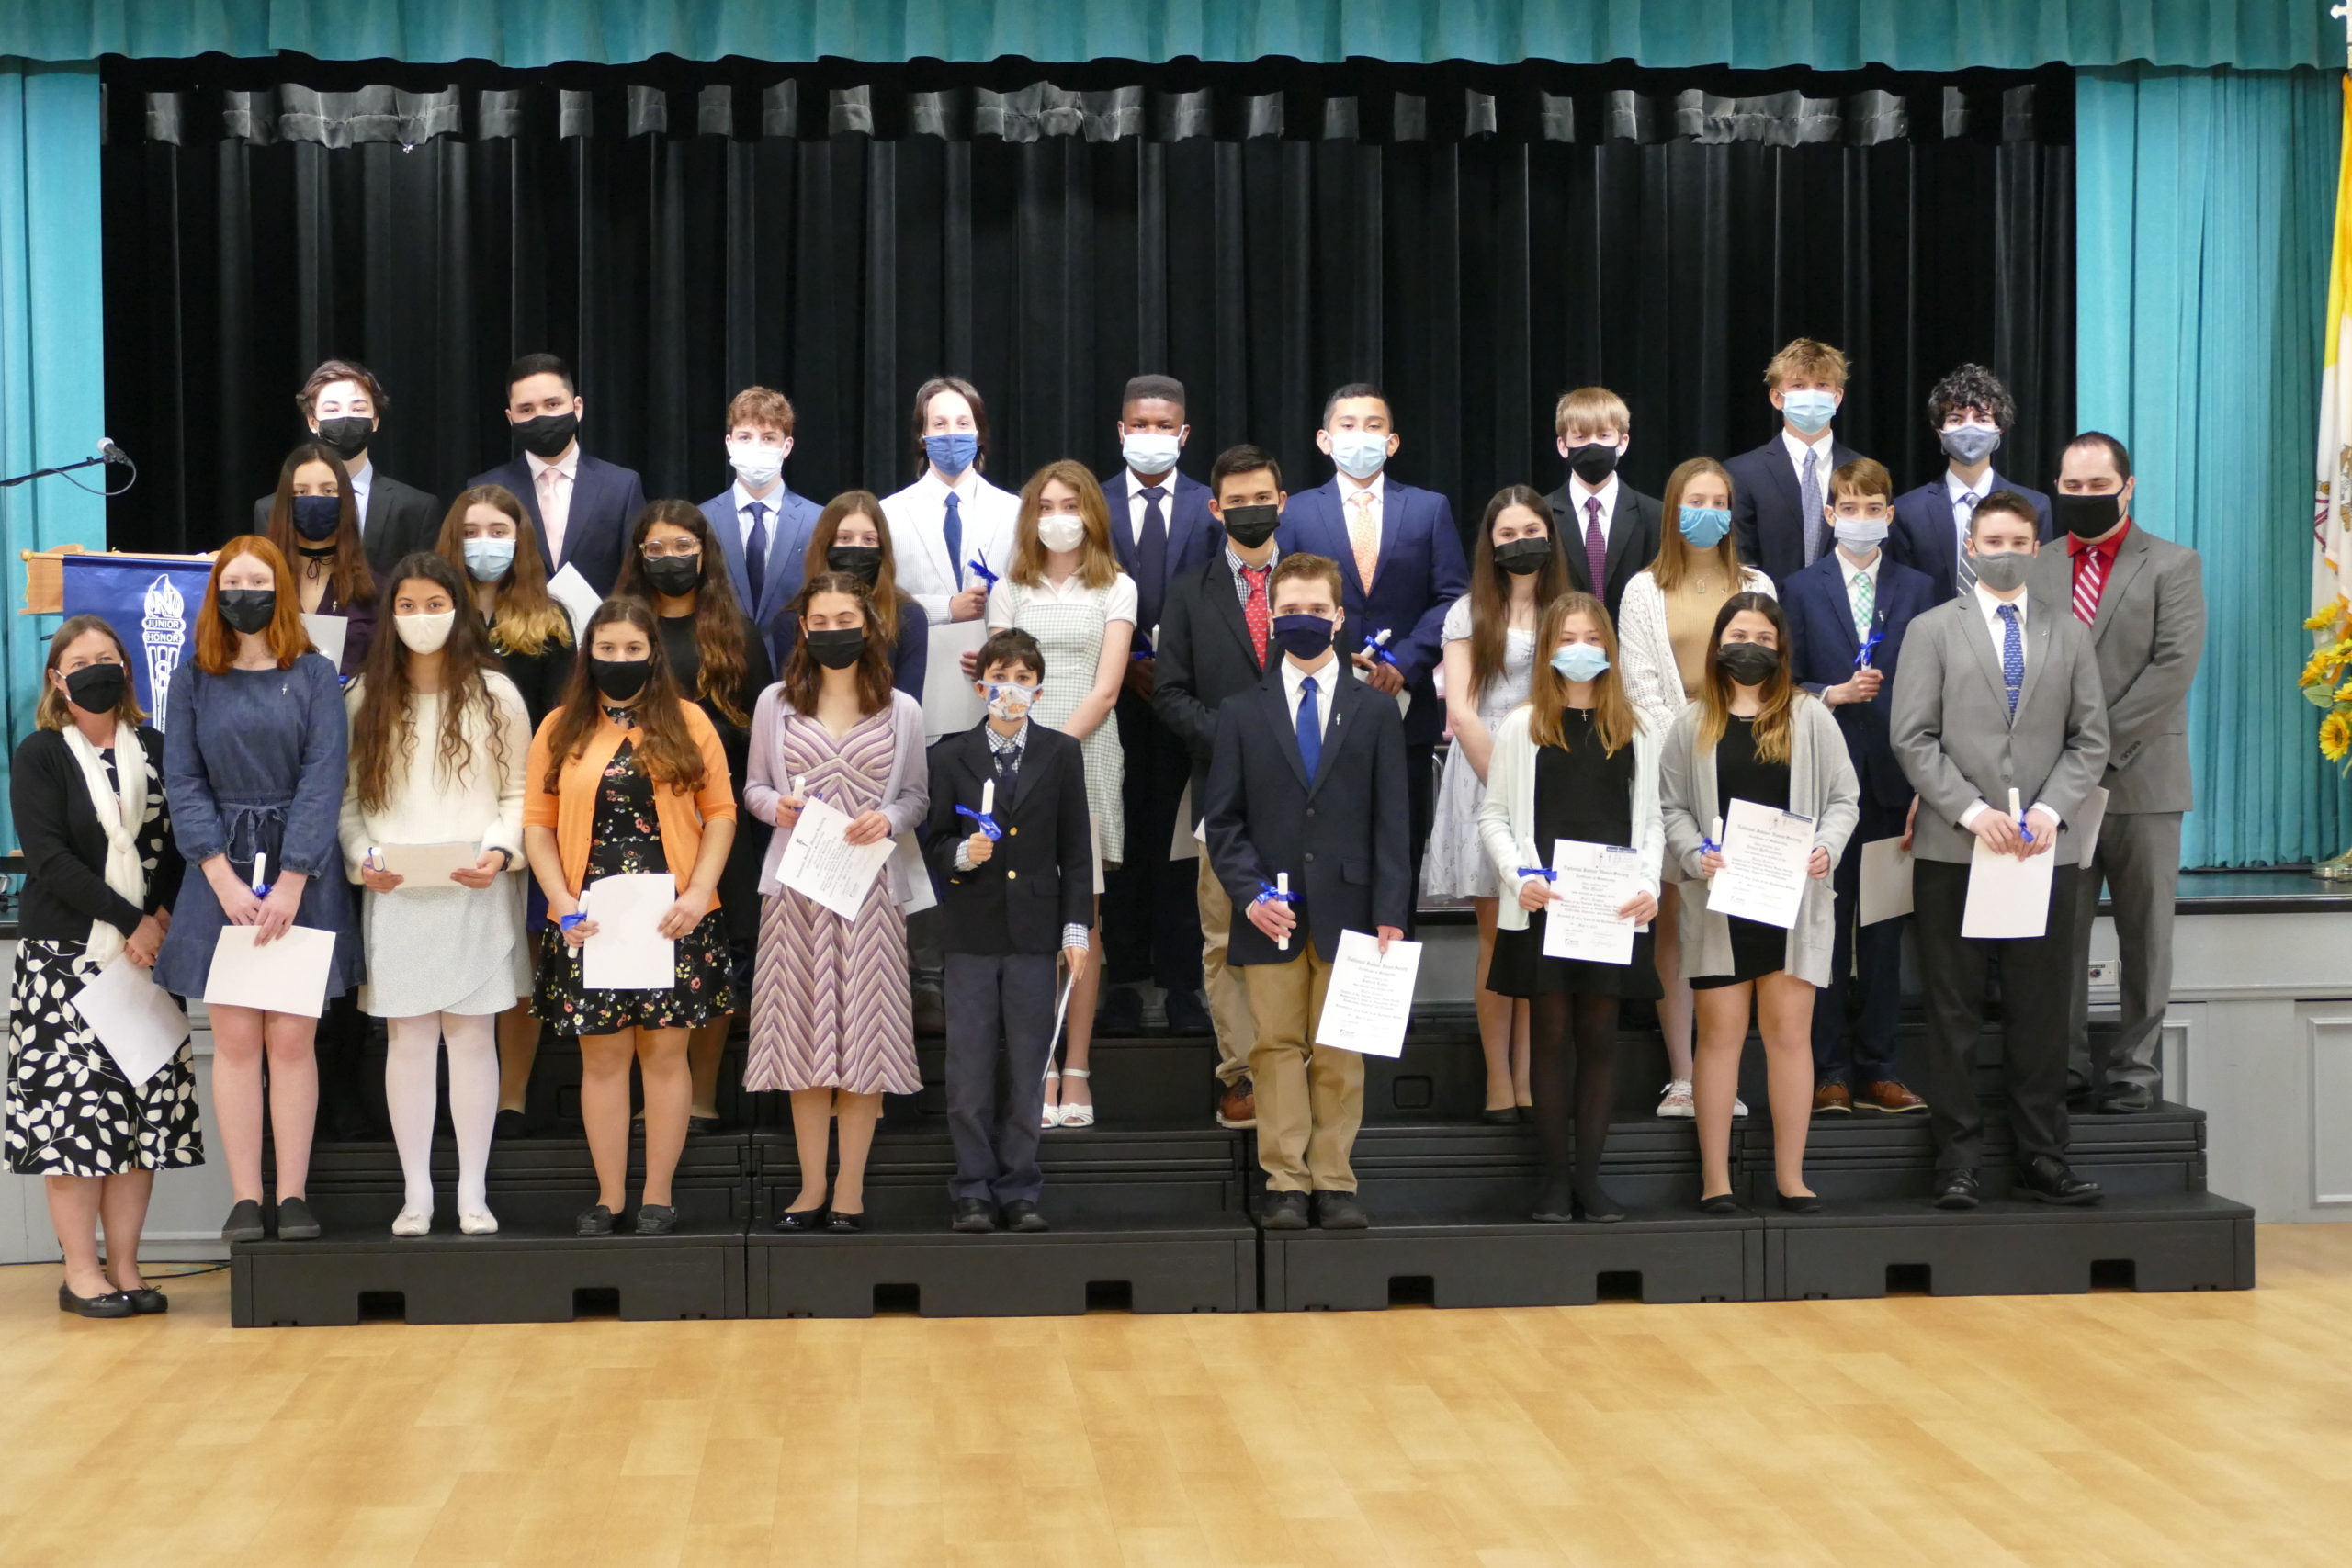 Twenty-eight students at Our Lady of the Hamptons were inducted into the National Junior Honor Society.